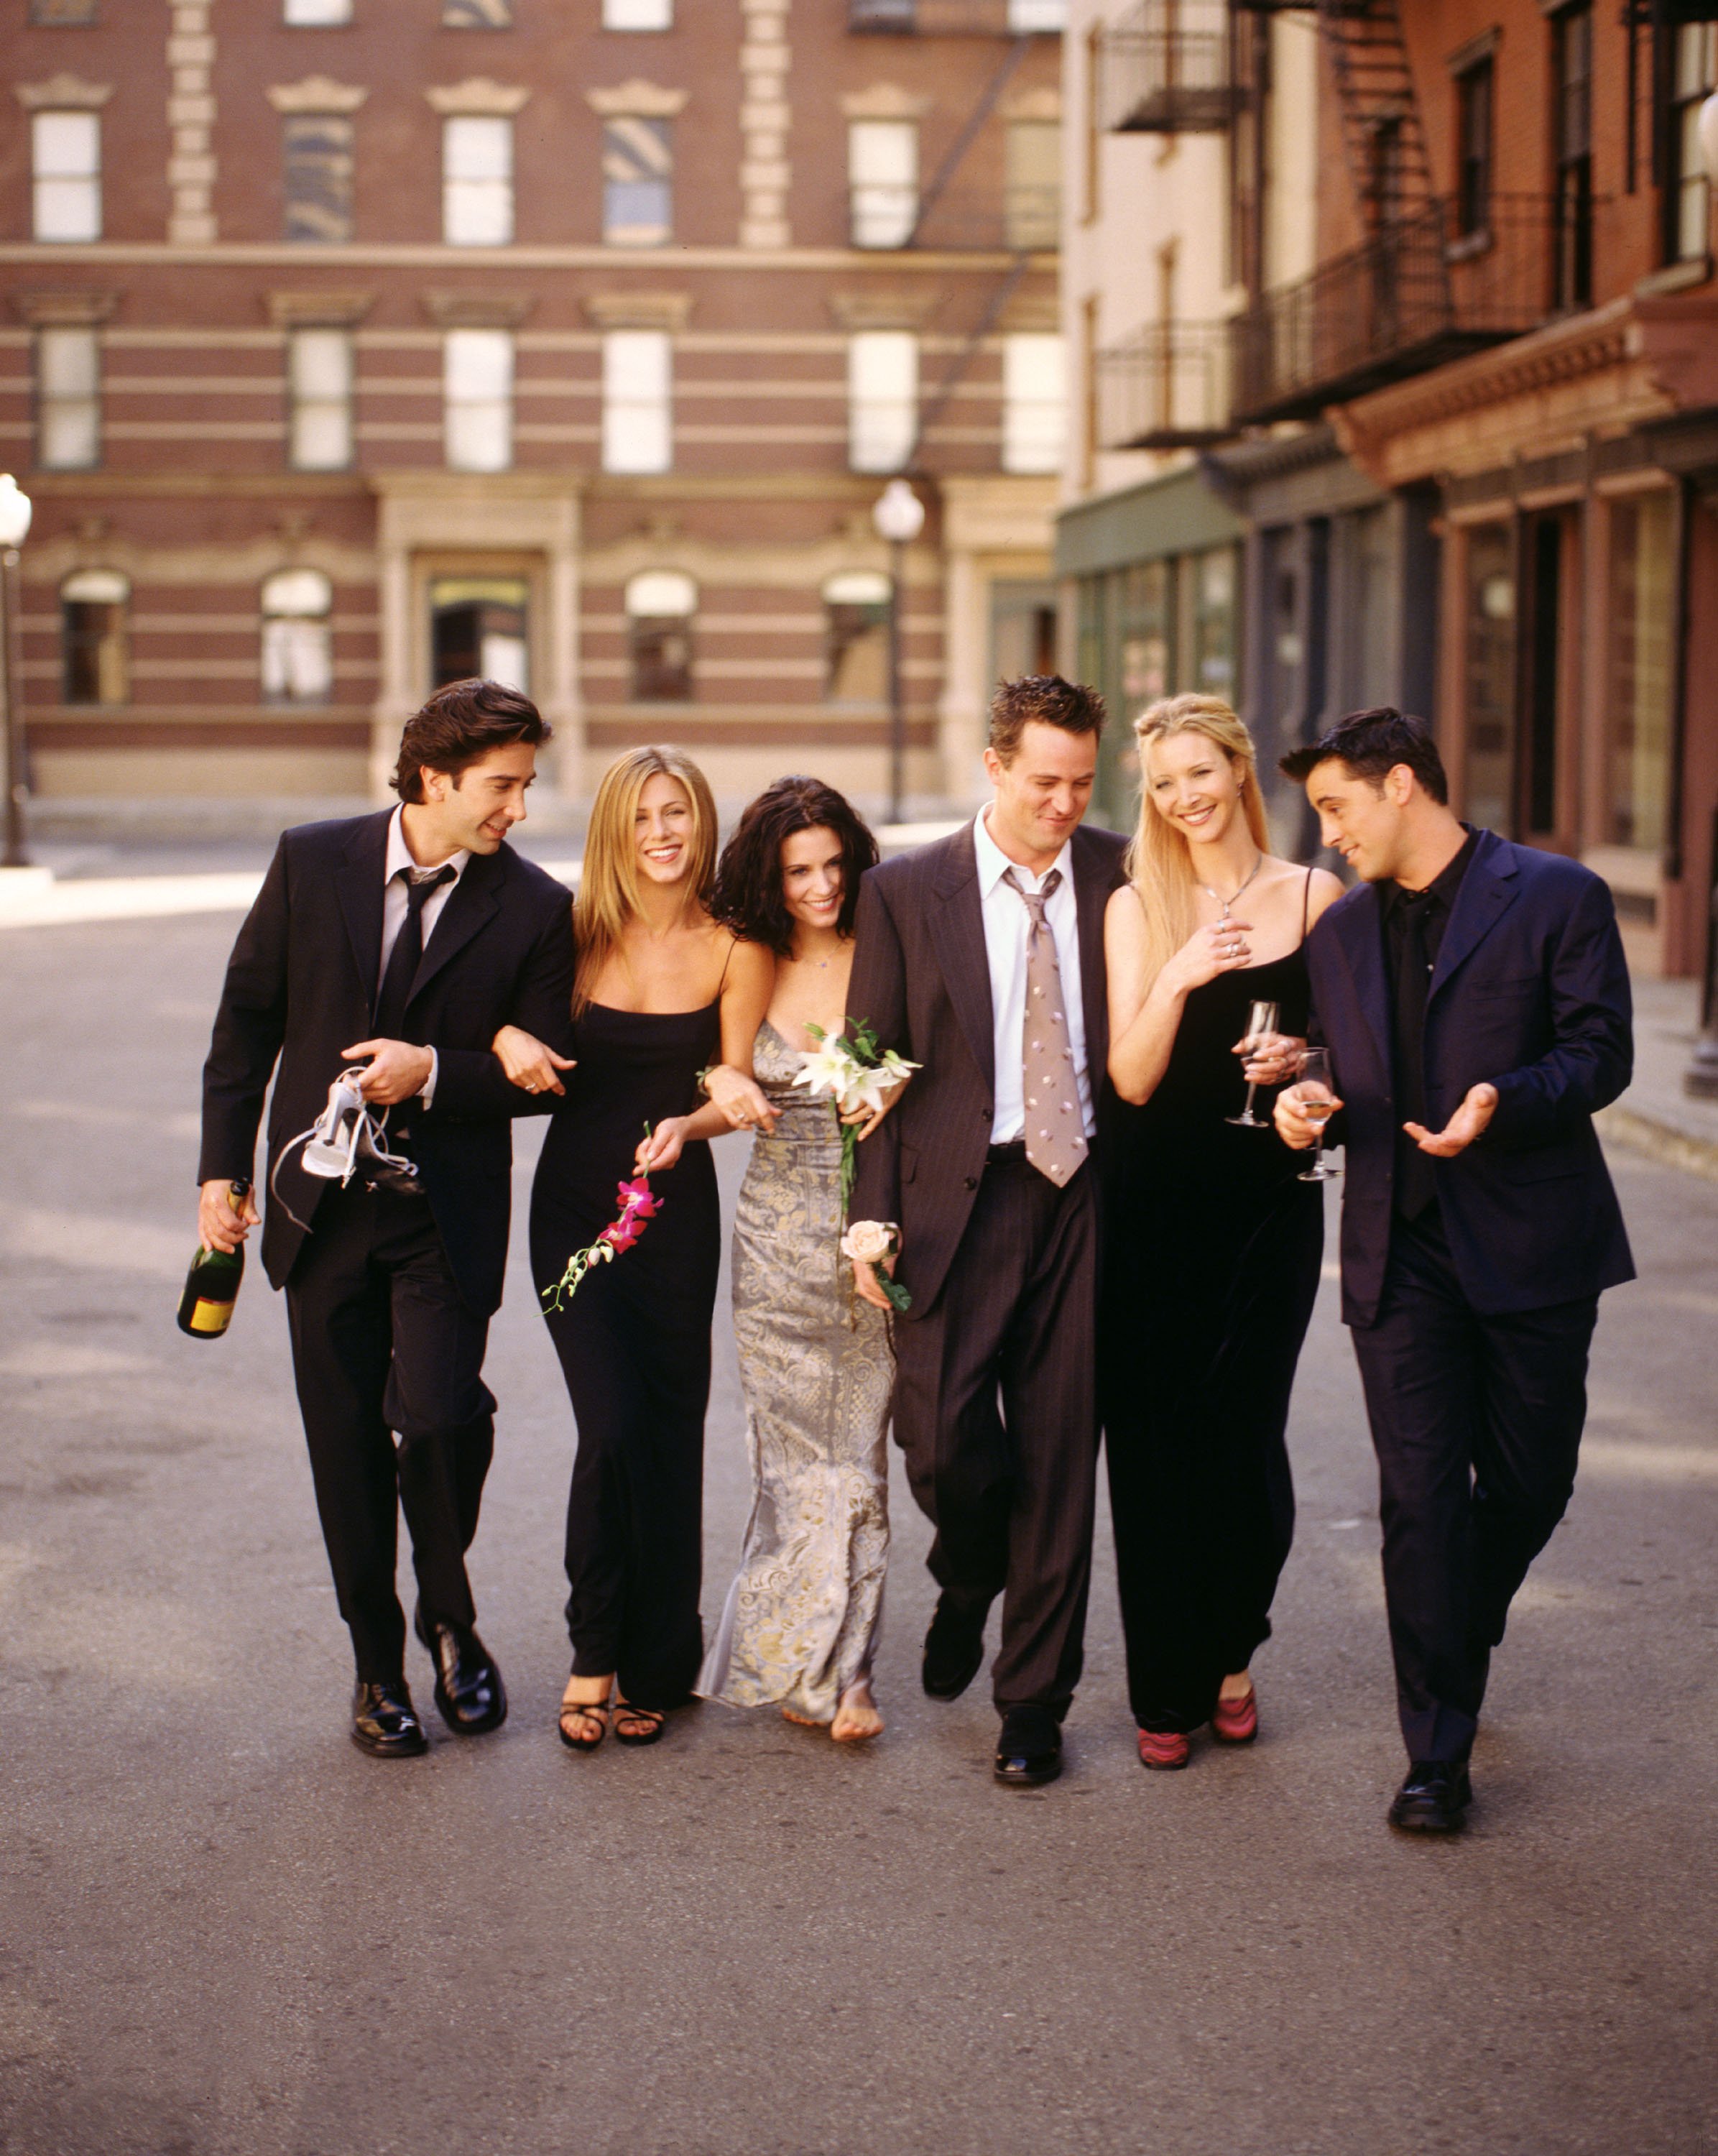 One of the stills of the 1994 "Friends" TV series. | Photo: Getty Images